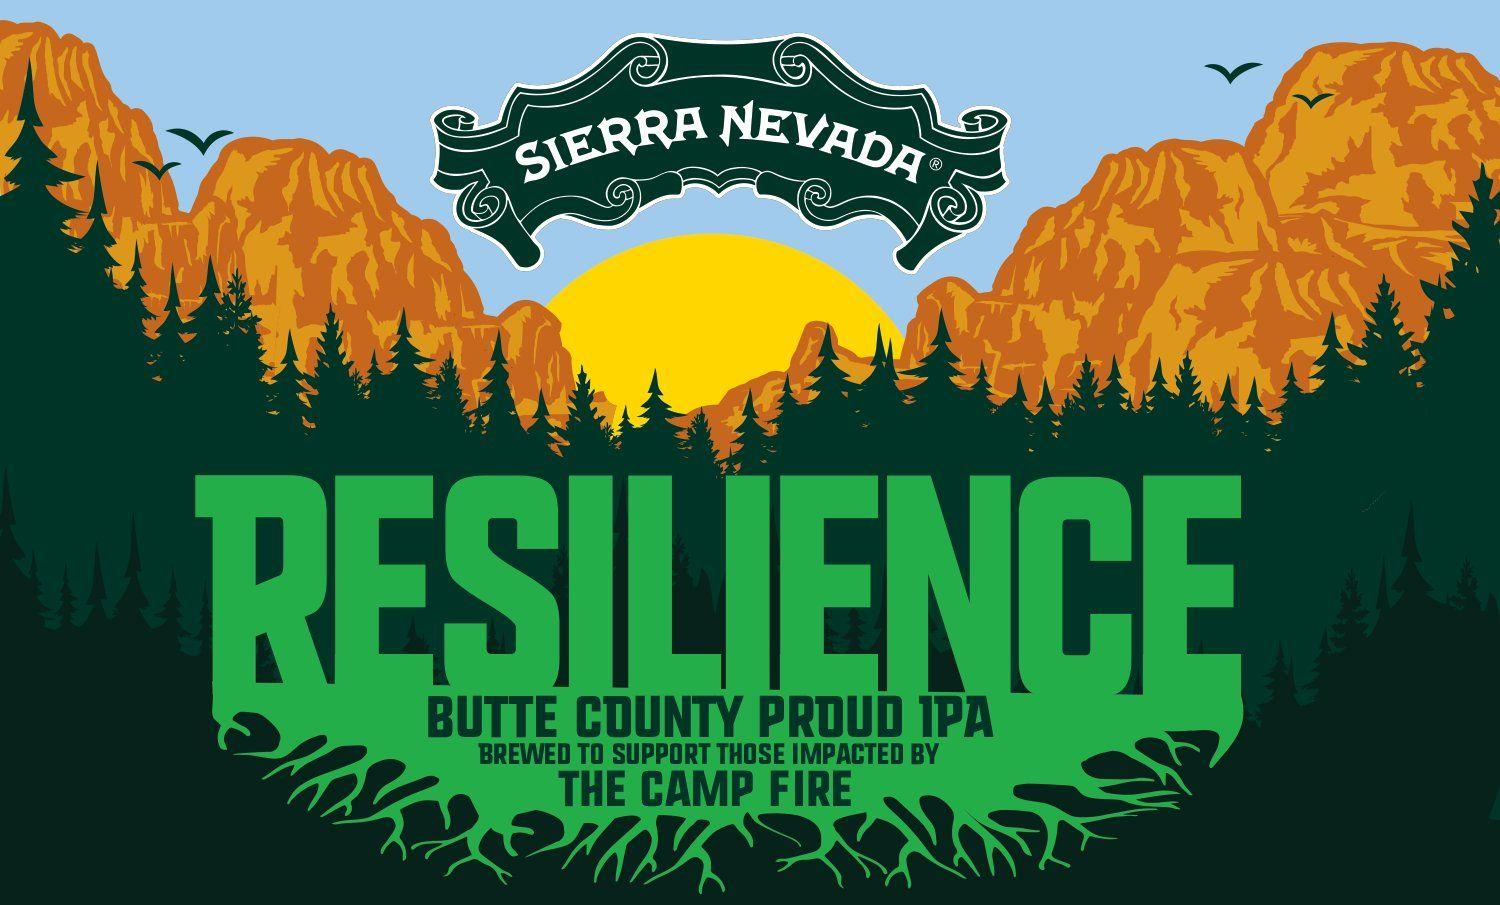 Sierra Nevada Brewing Logo - Brewers Plan to Make the Exact Same Beer for Charity